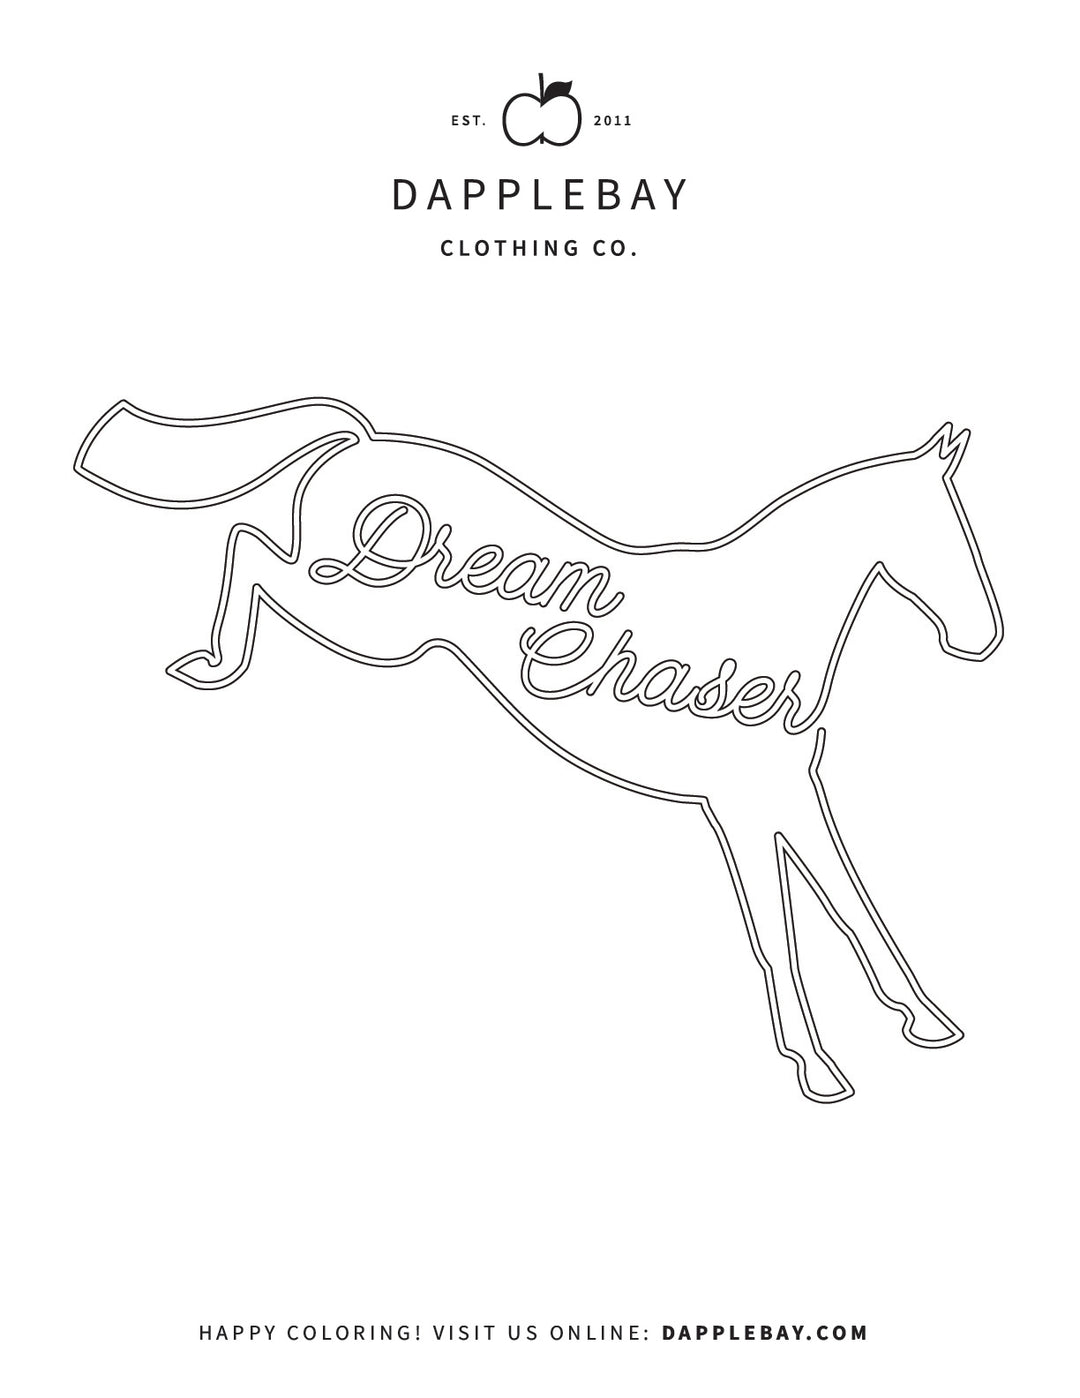 Coloring Page - Eventing Dream Chaser